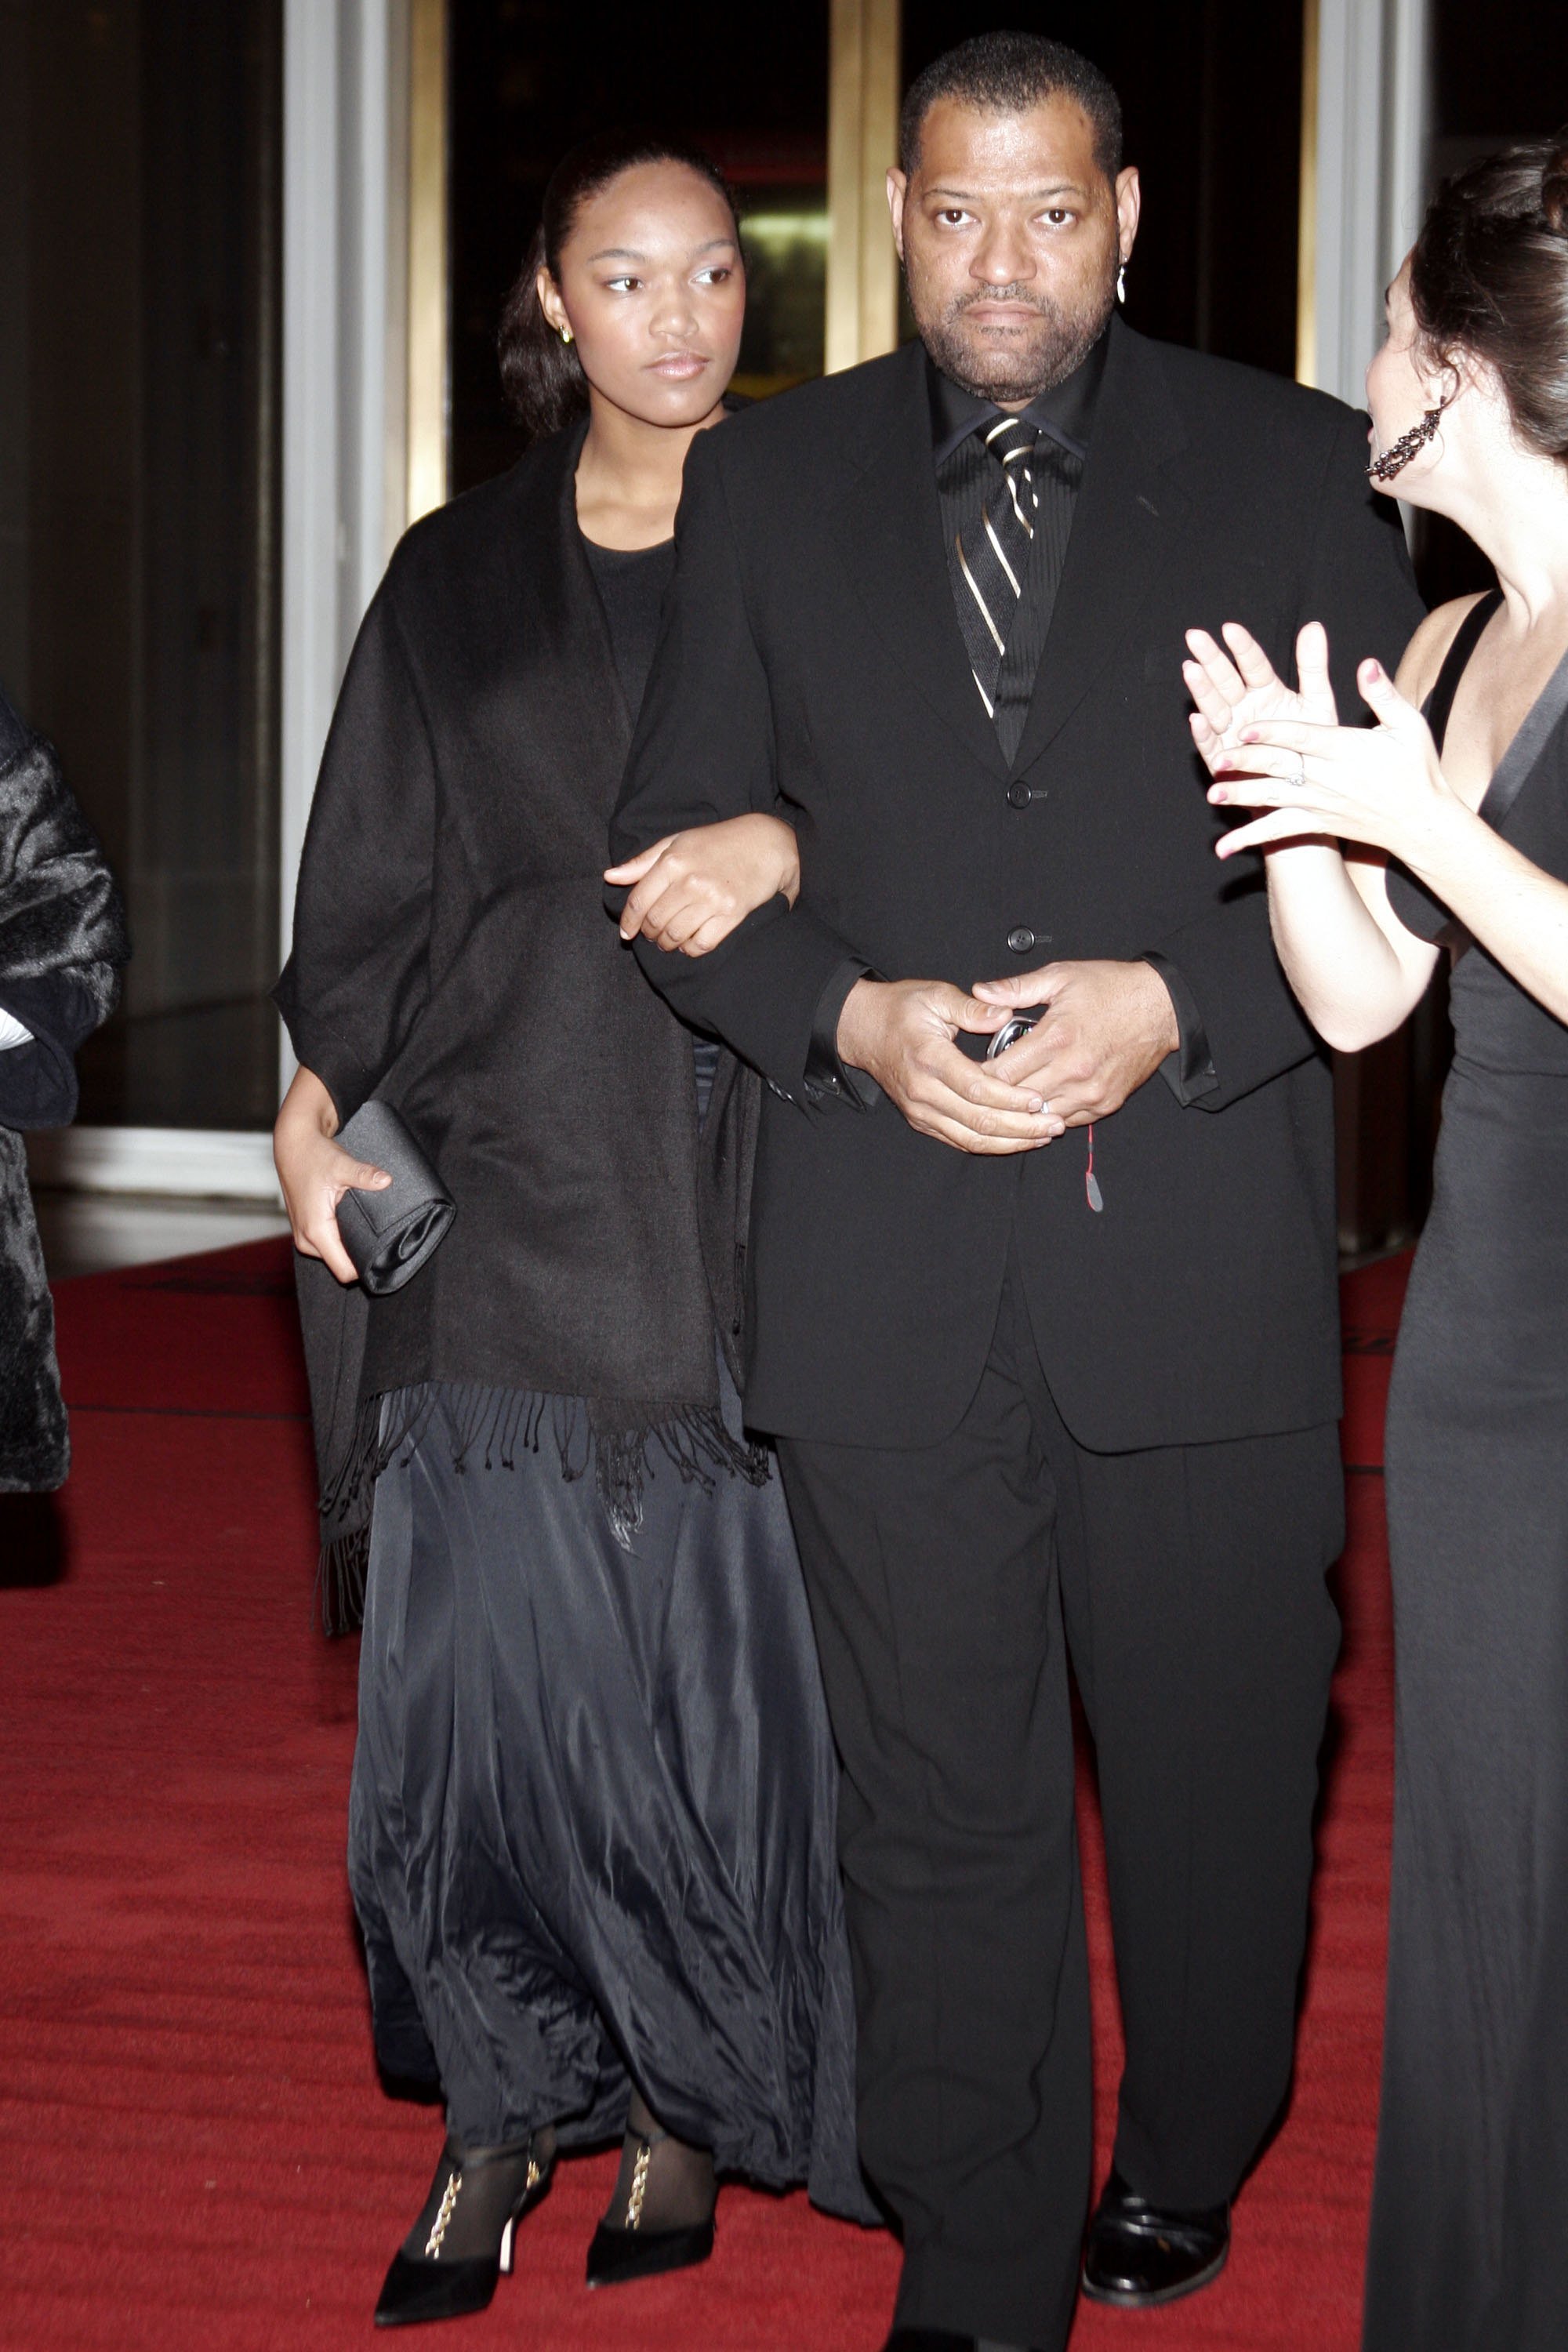 Laurence Fishburne and Montana Fishburne at the National Dream Gala to celebrate the Martin Luther King Jr. Memorial groundbreaking November 13, 2006, in Washington, DC. | Source: Getty Images